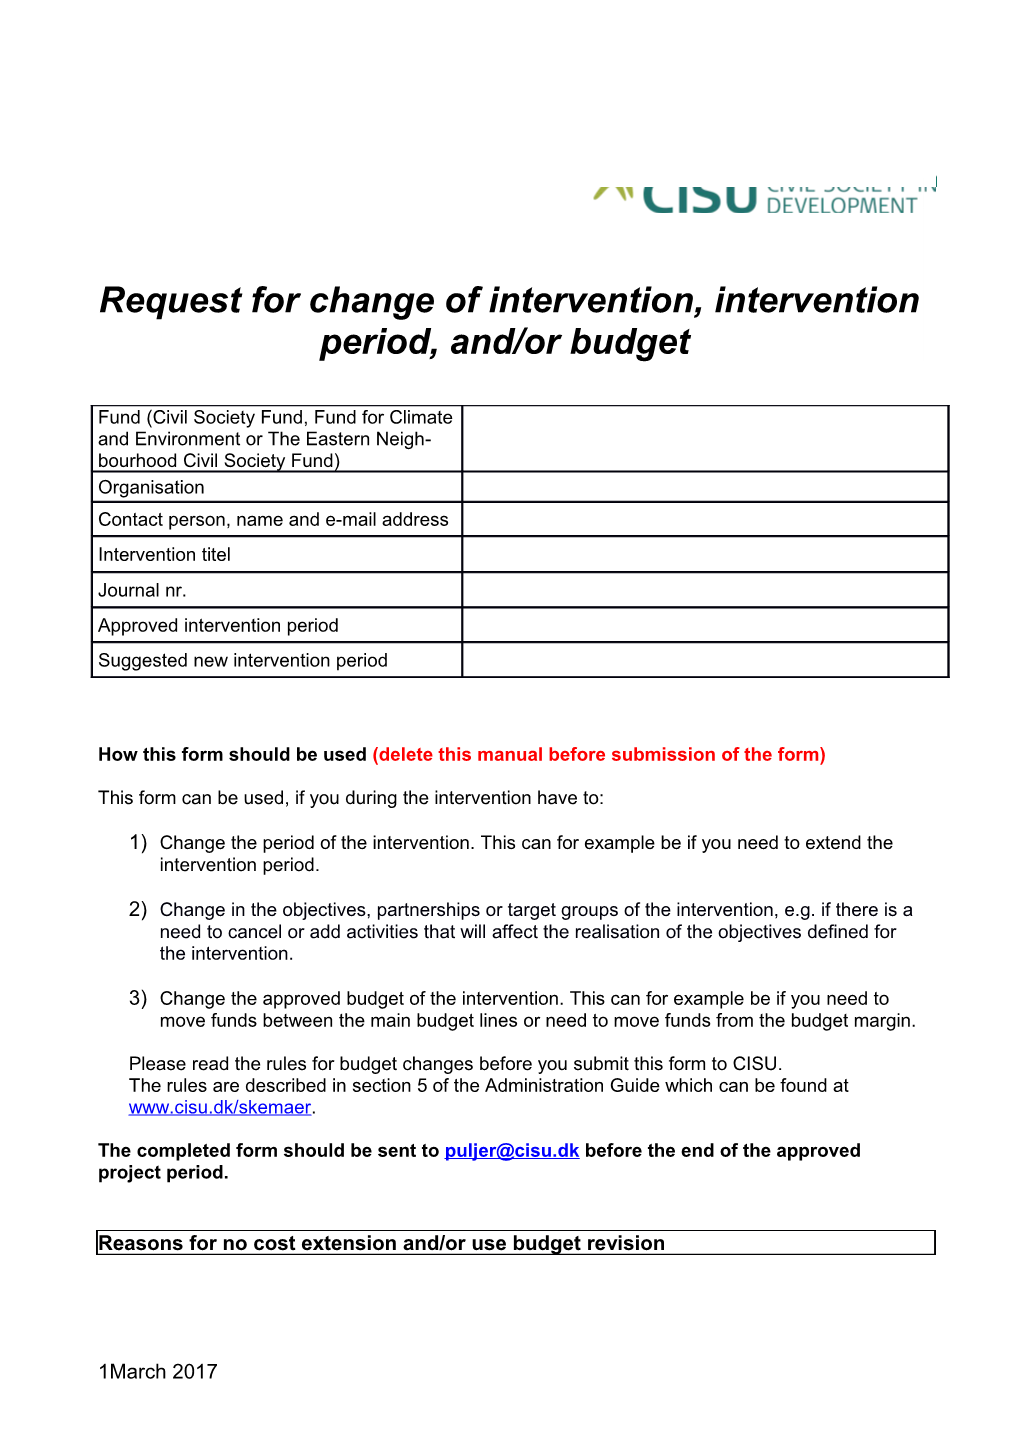 Request for Change of Intervention, Intervention Period, And/Or Budget